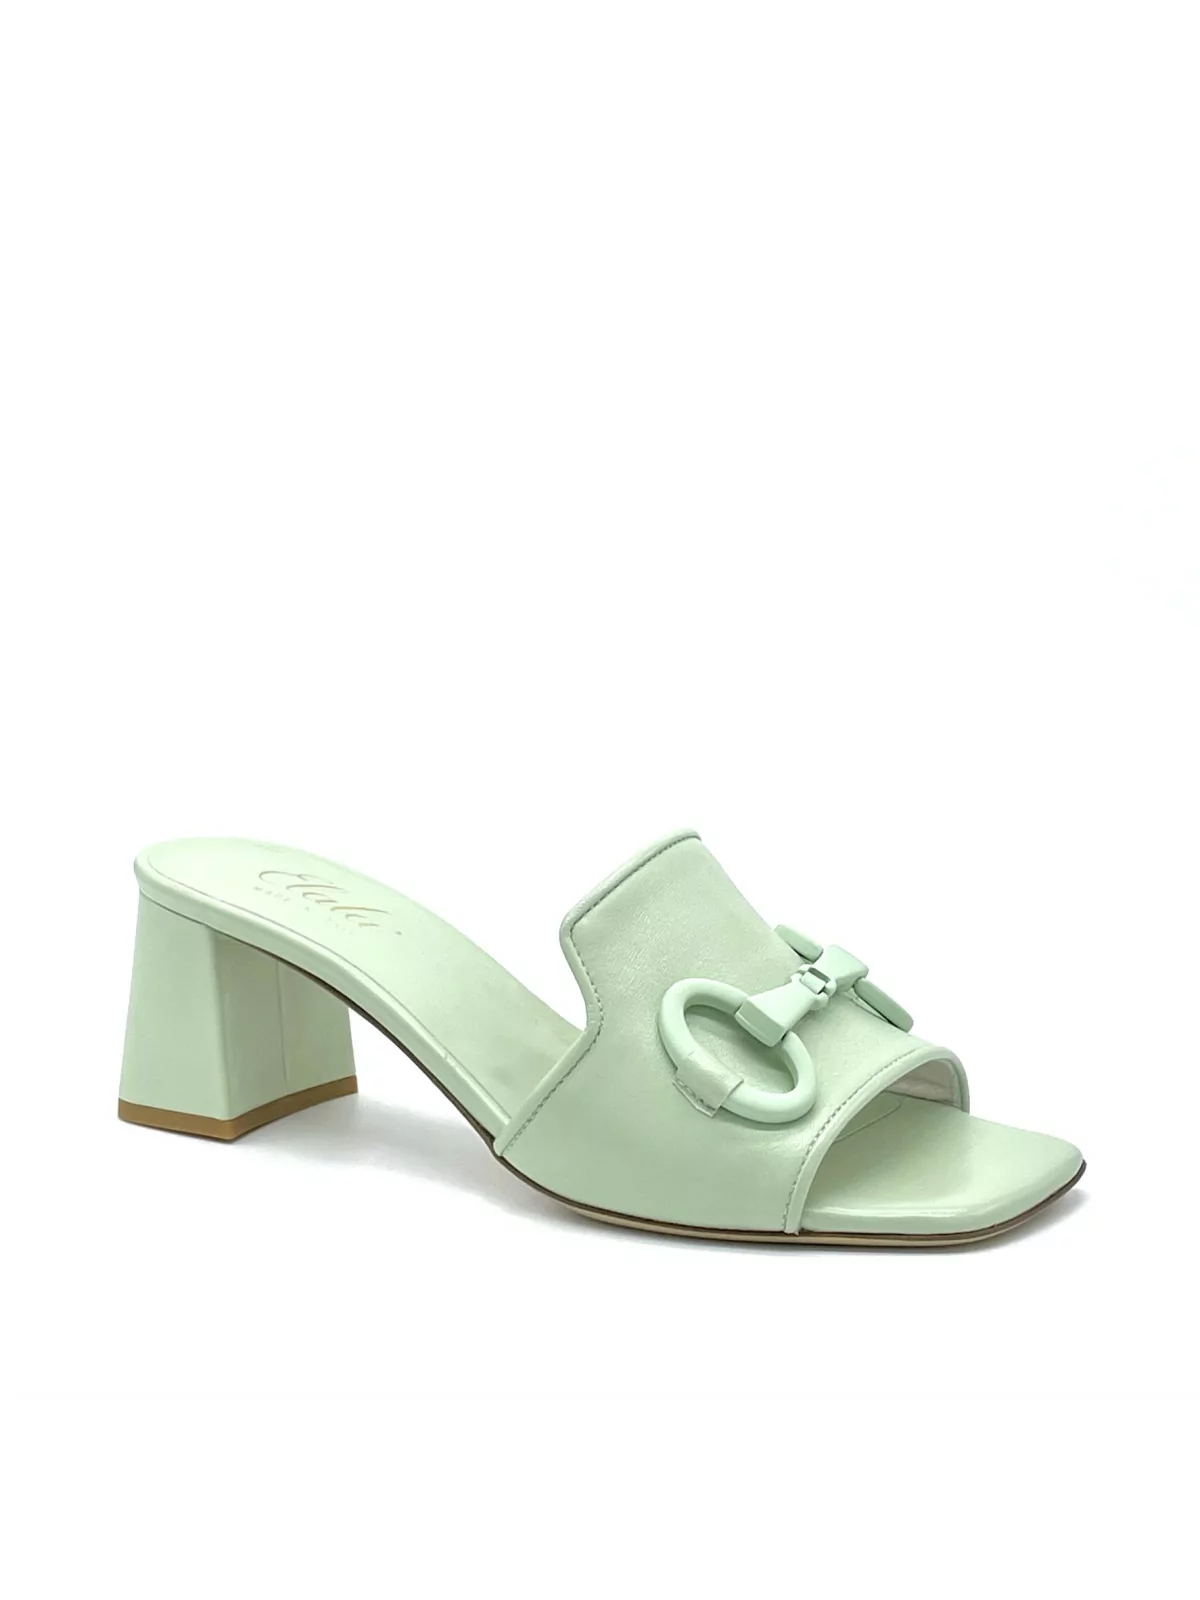 Green leather mule with matching accessory. Leather lining. Leather sole. 5,5 cm